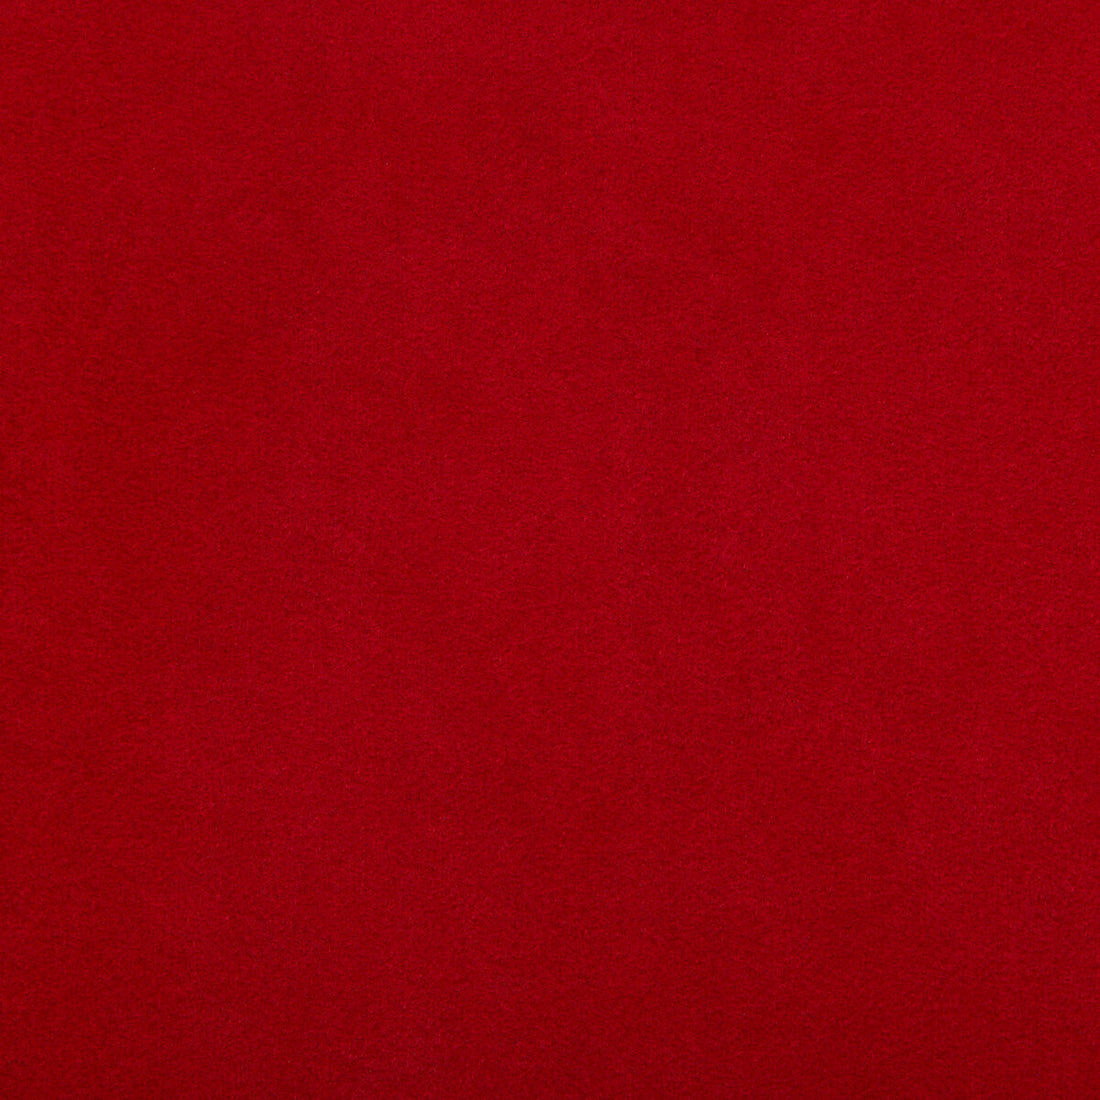 Ultimate fabric in ladybug color - pattern 960122.2.0 - by Lee Jofa in the Ultimate Suede collection